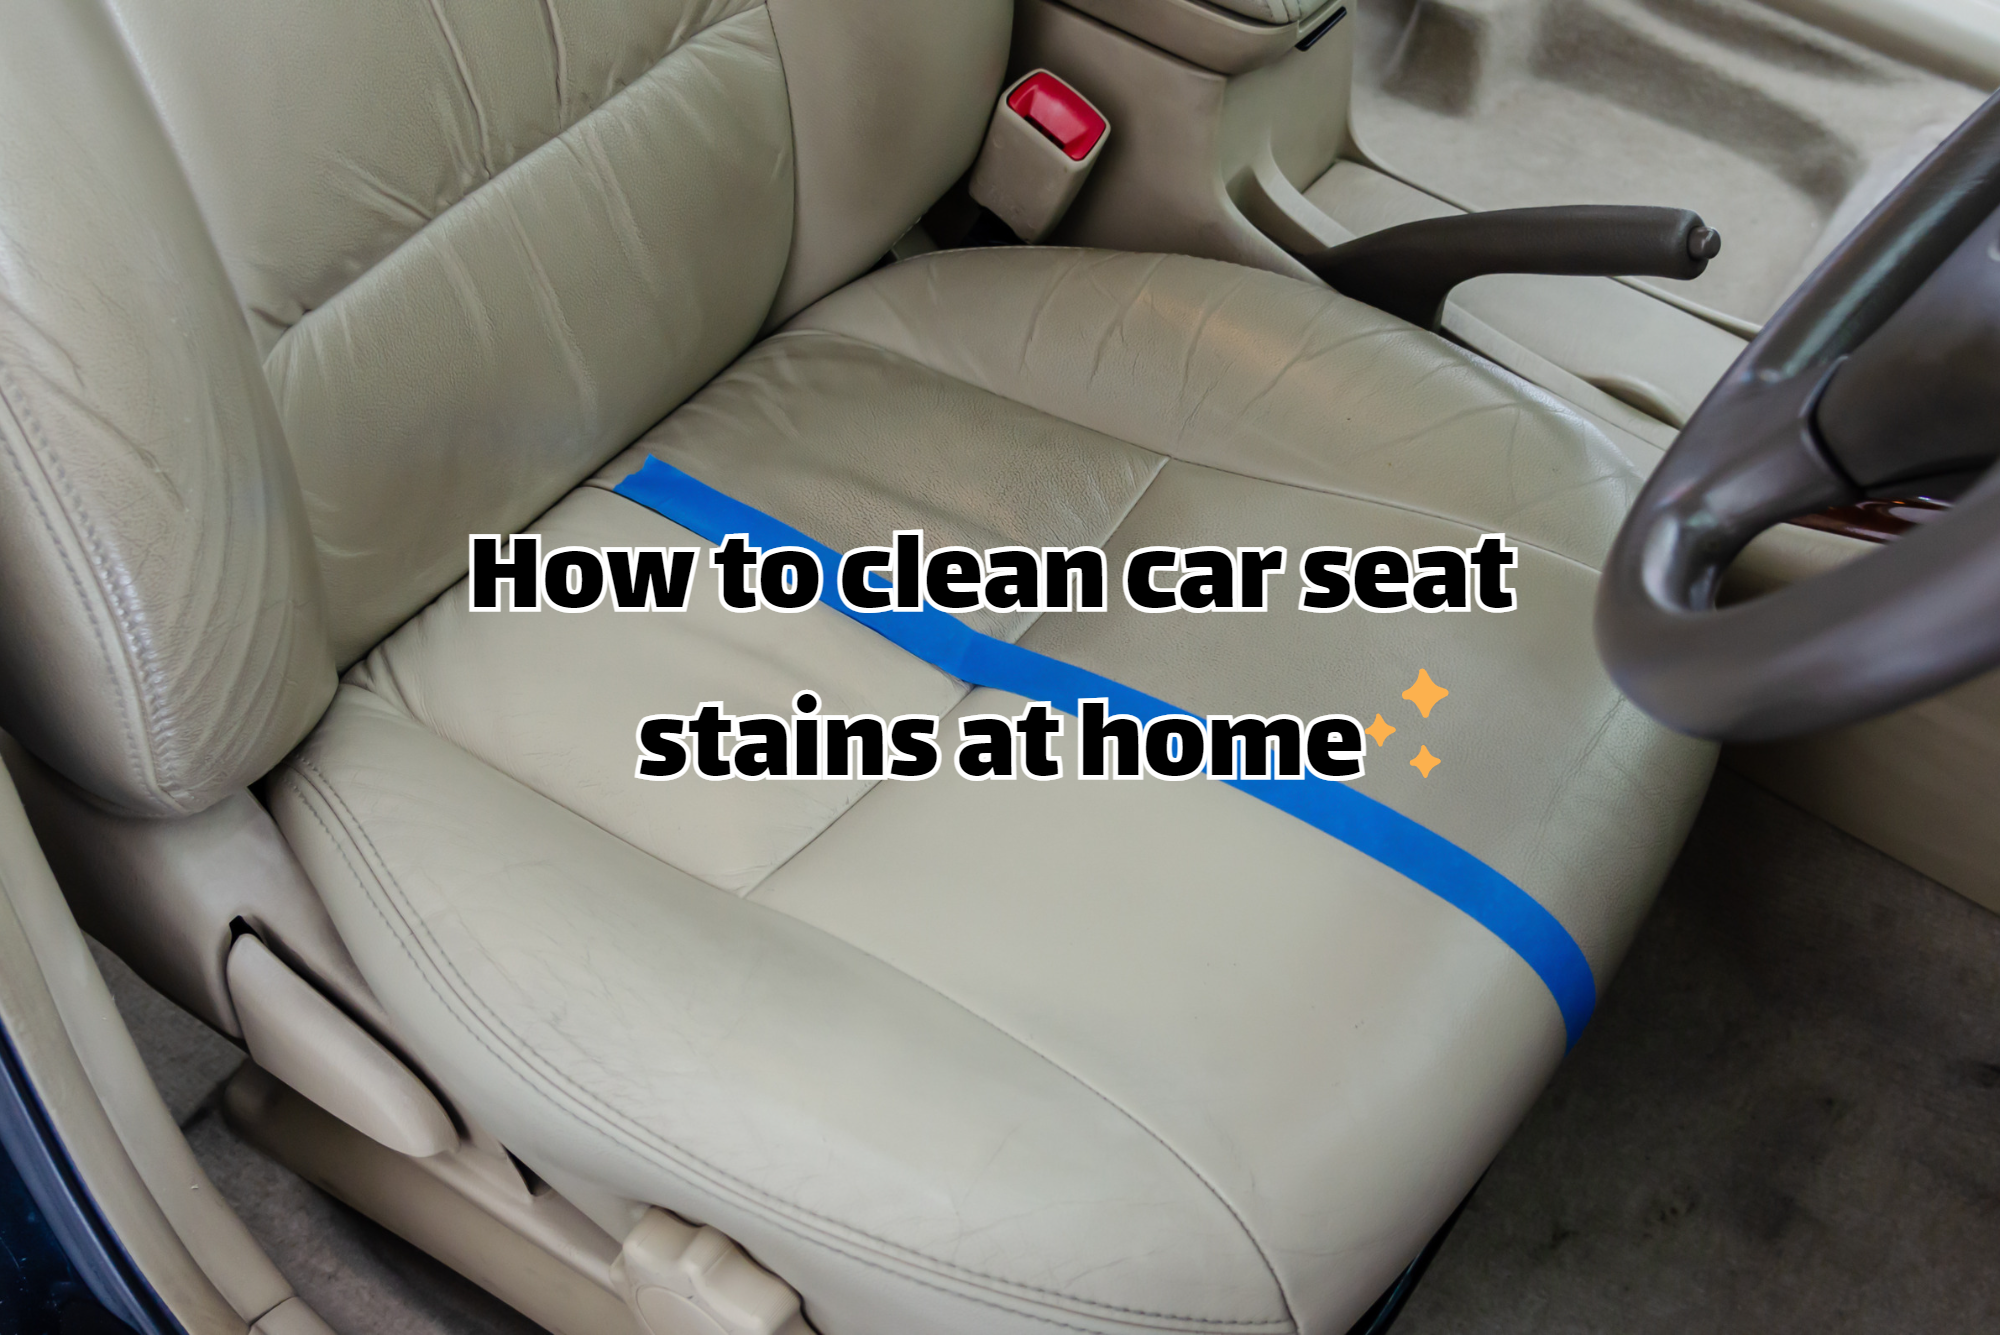 How to clean car seat stains at home